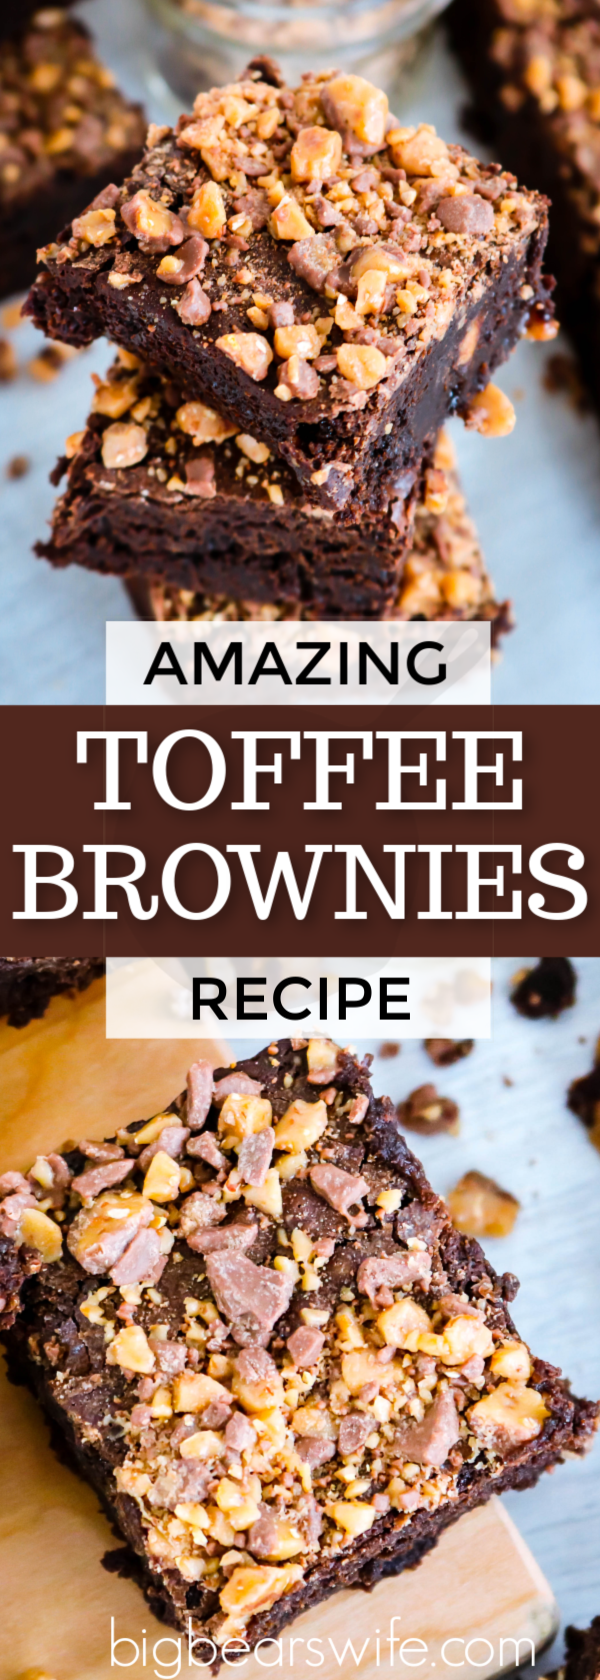 Toffee Brownies - Tasty toffee and fudge marry together in the perfect dessert combination with these delicious Toffee Brownies! #ToffeeBrownies #BrownieRecipe via @bigbearswife